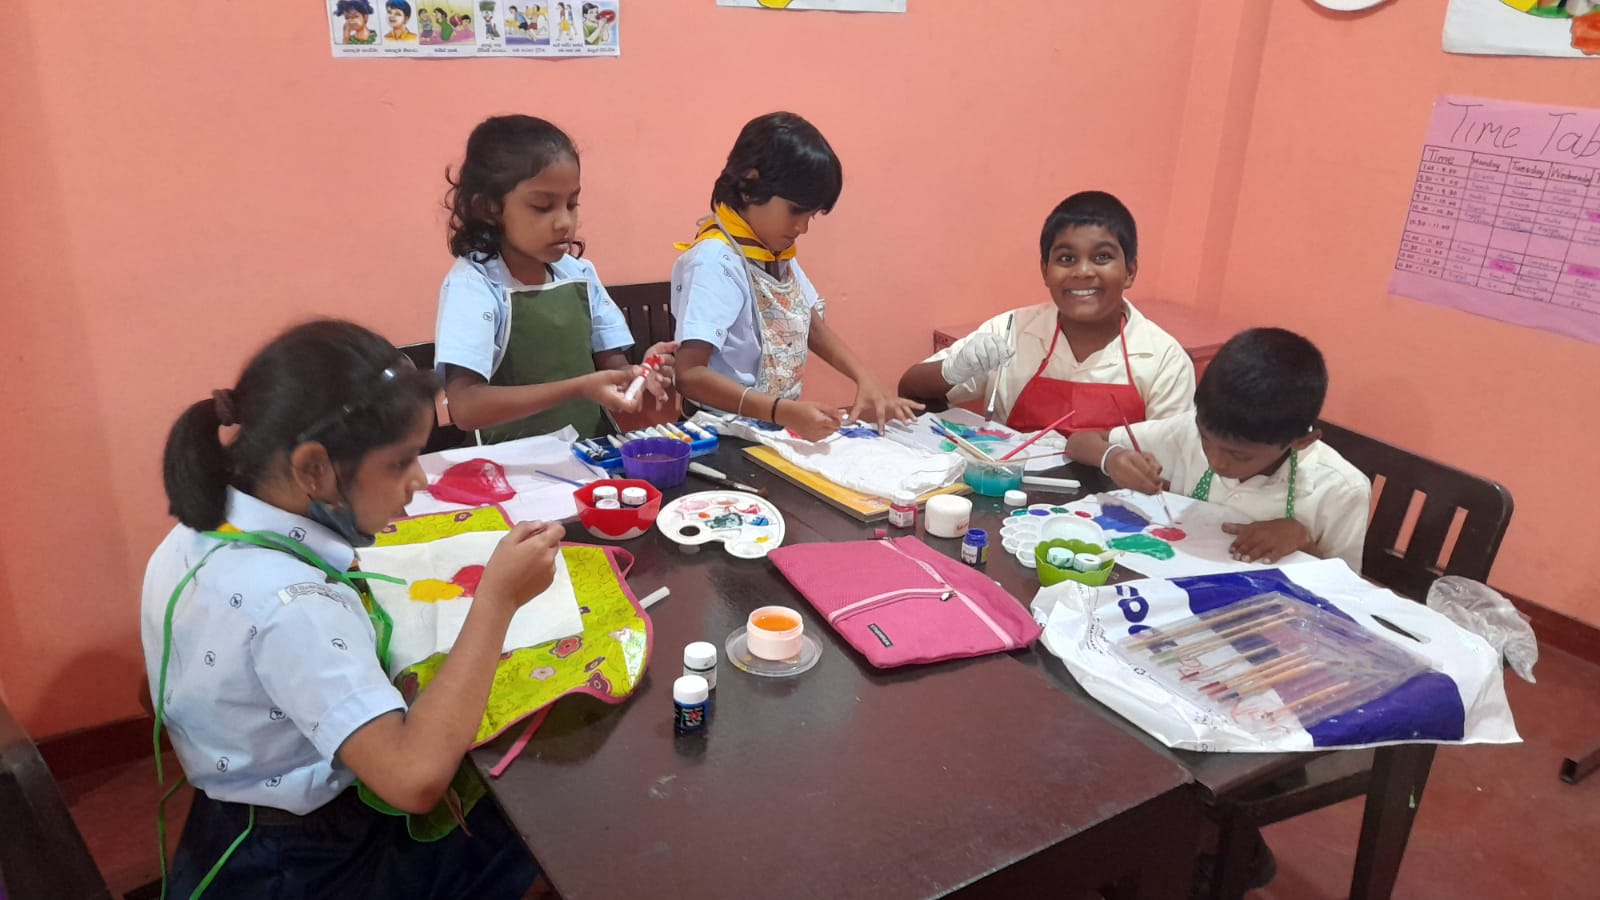 The primary students completed fabric painting with colourful textures and patterns in appreciation of Home Science Day.